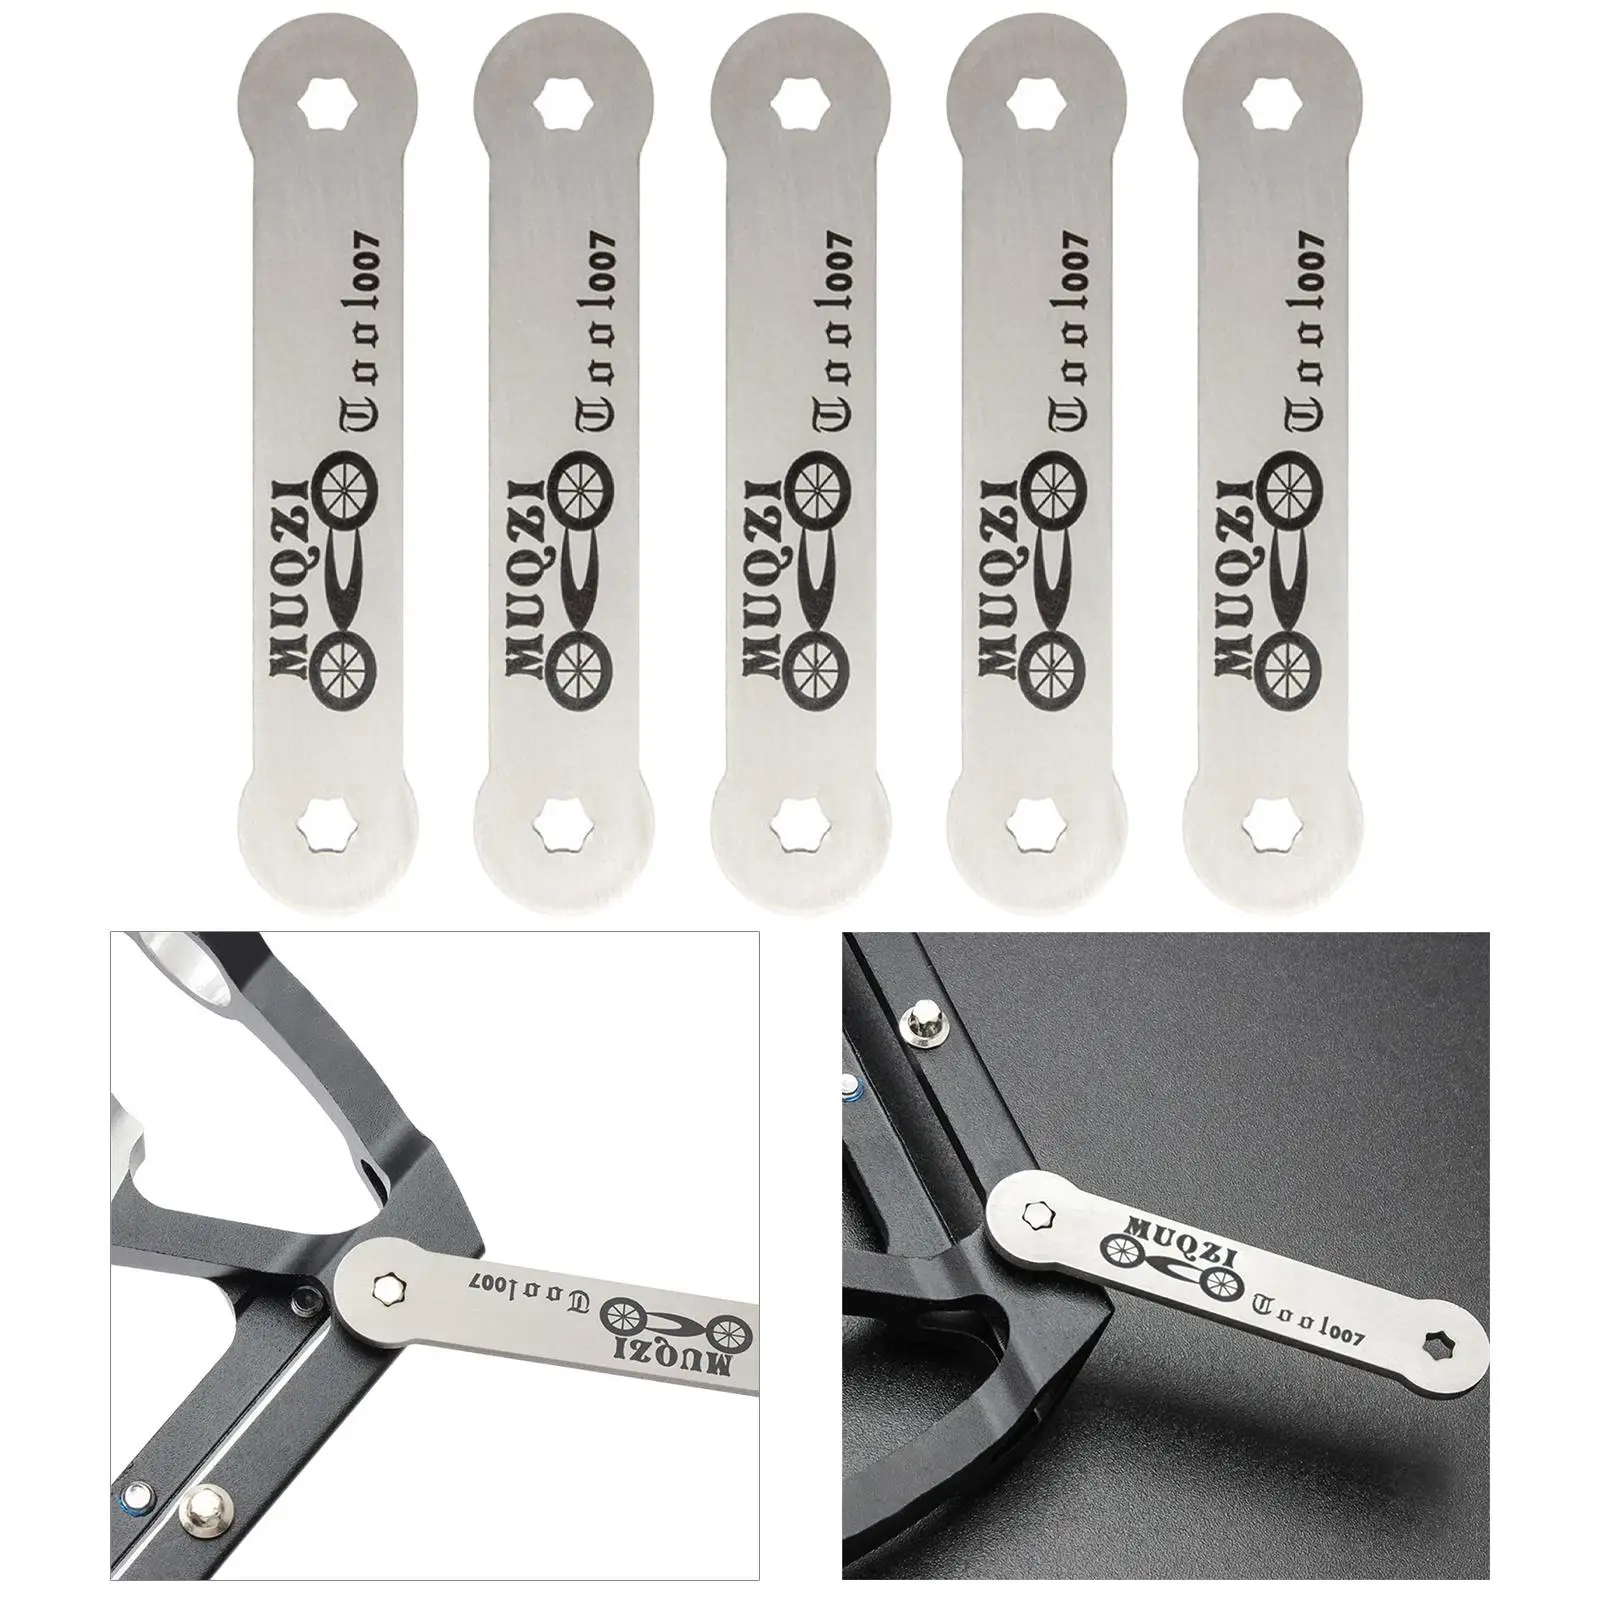 5 x Pedal Wrench Anti-Rust Removal Tool High-Quality for Repair Cycling Bike